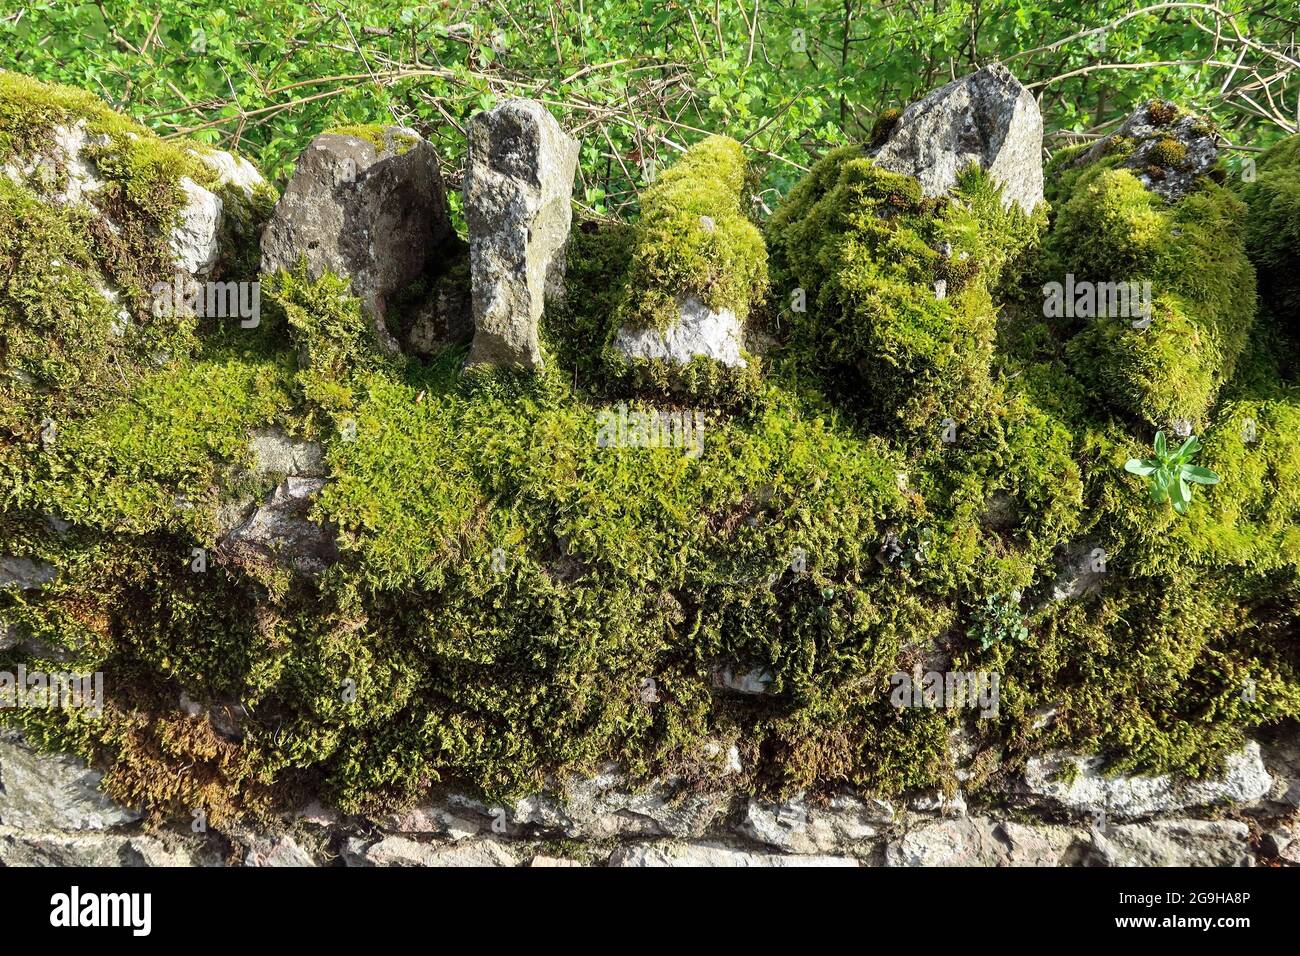 Moss growing on a rough stone wall. Stock Photo